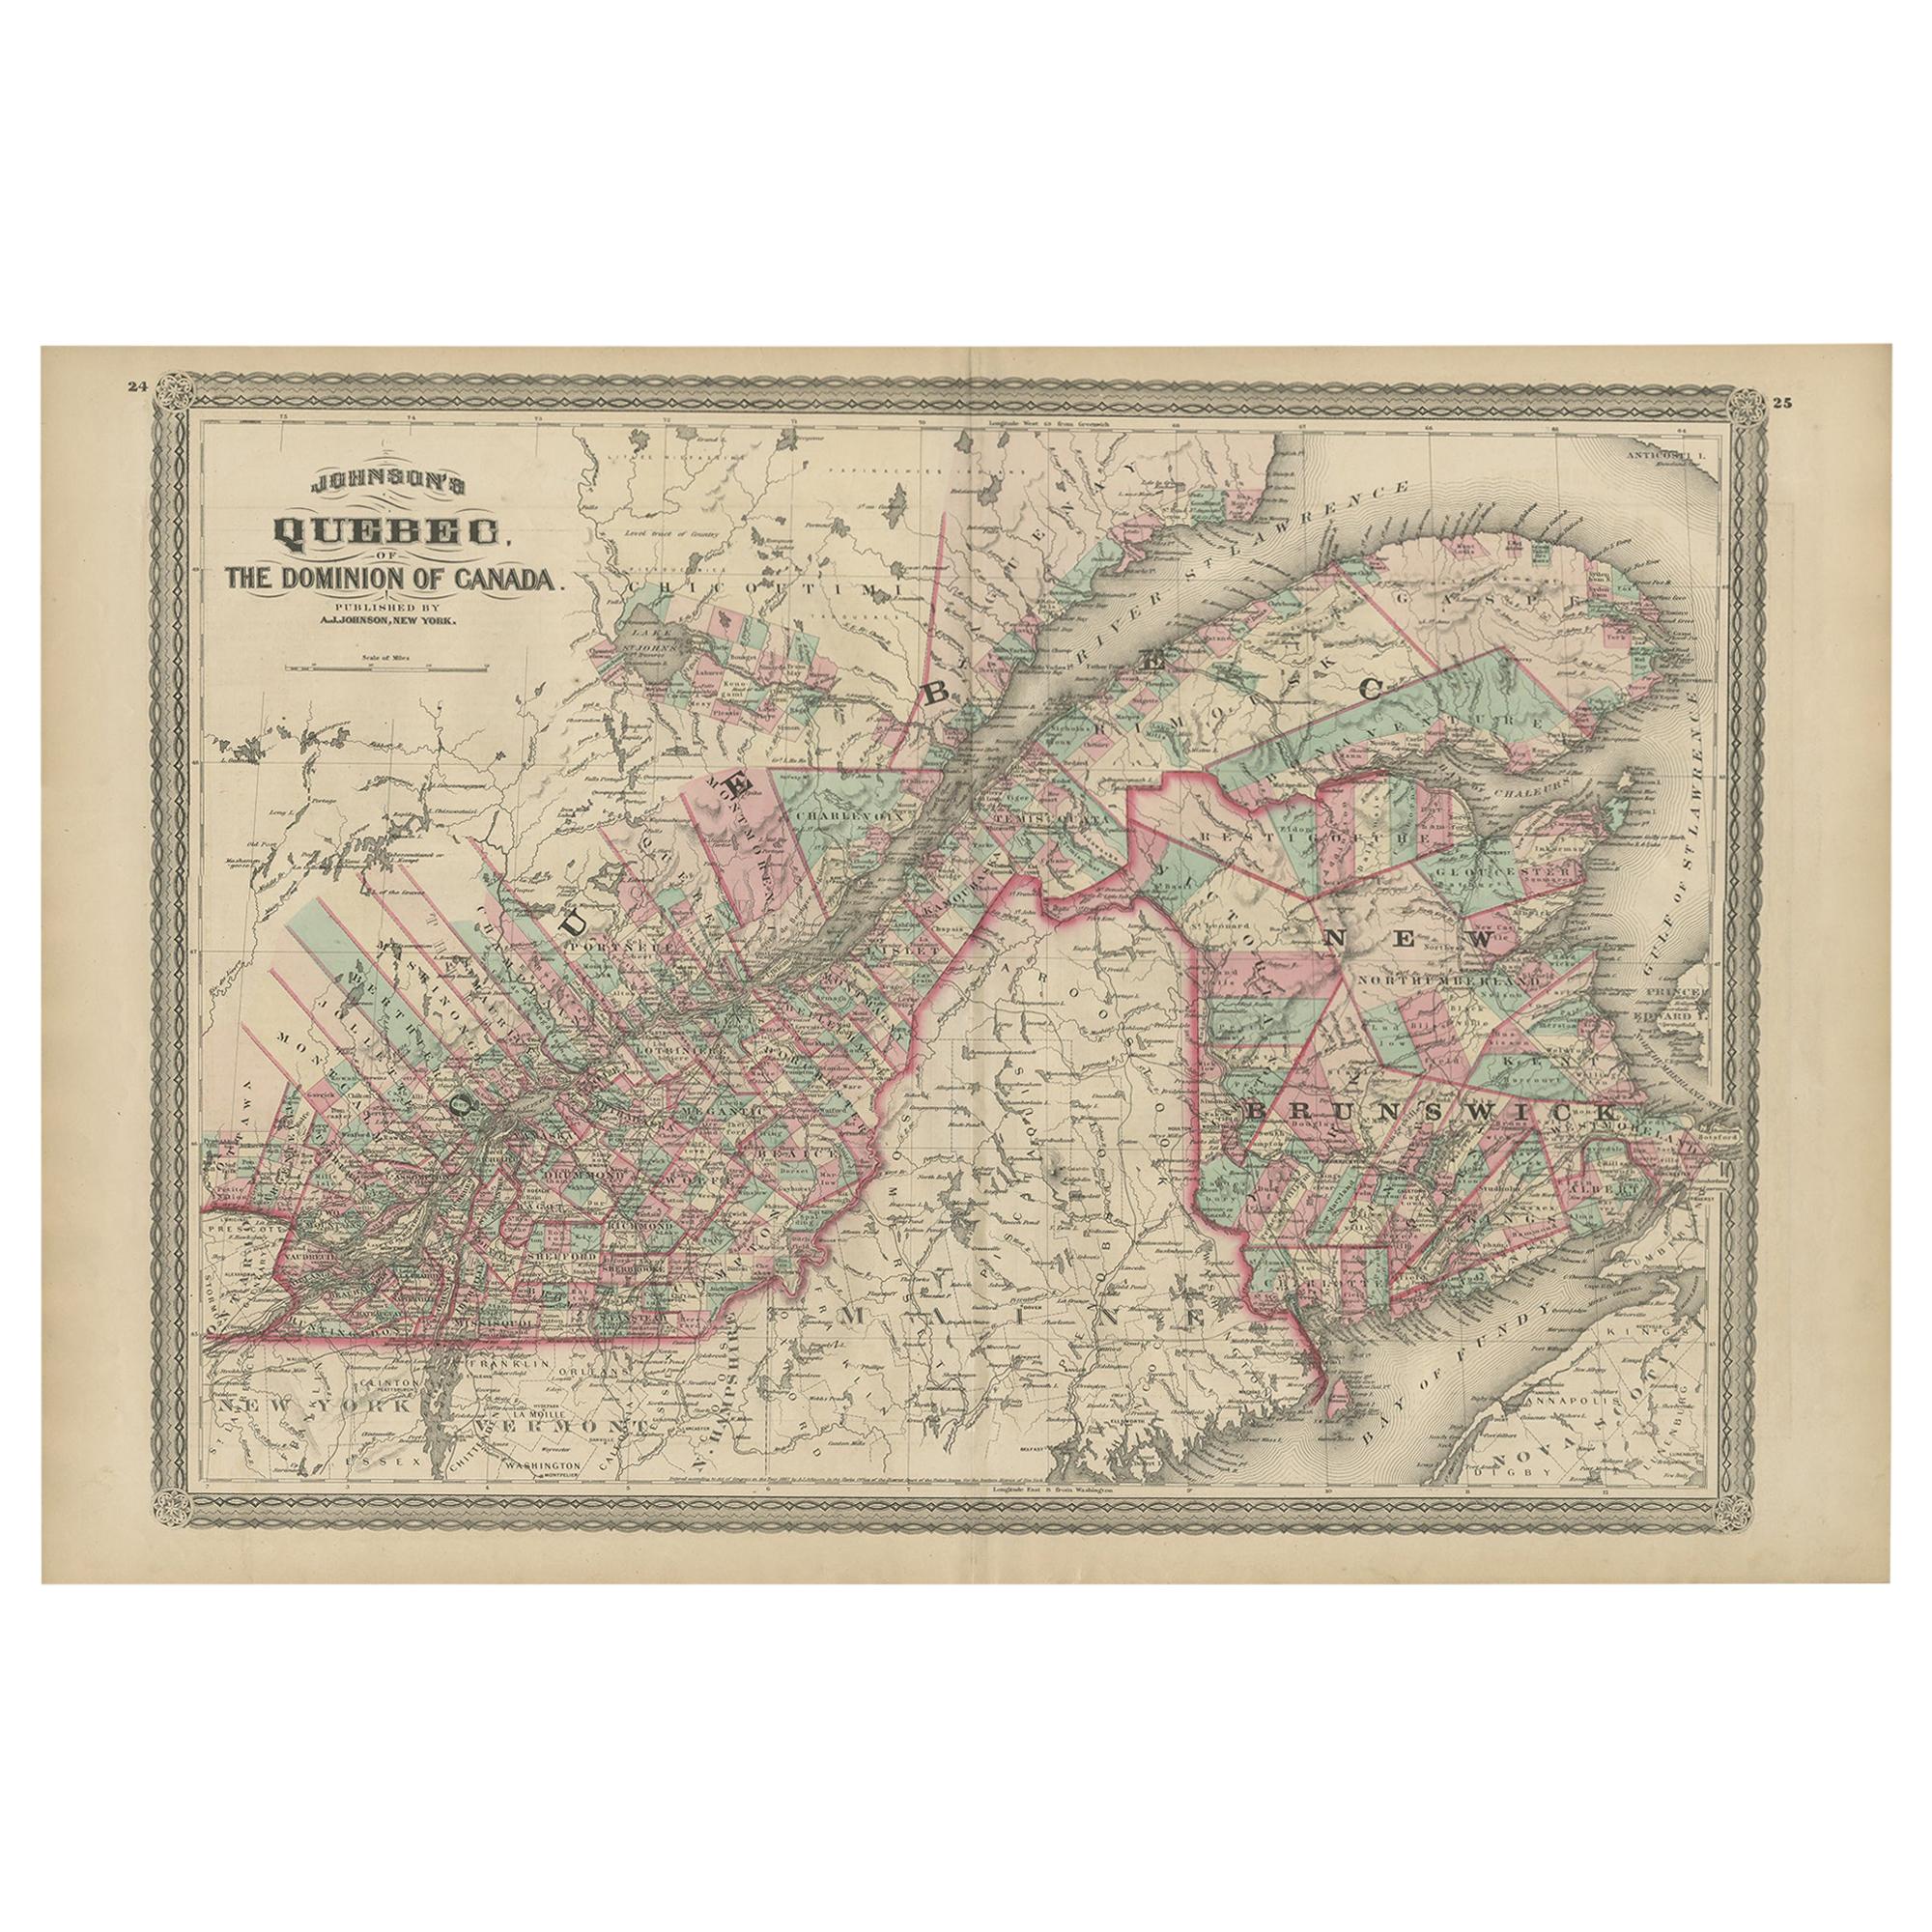 Antique Map of Quebec by Johnson, 1872